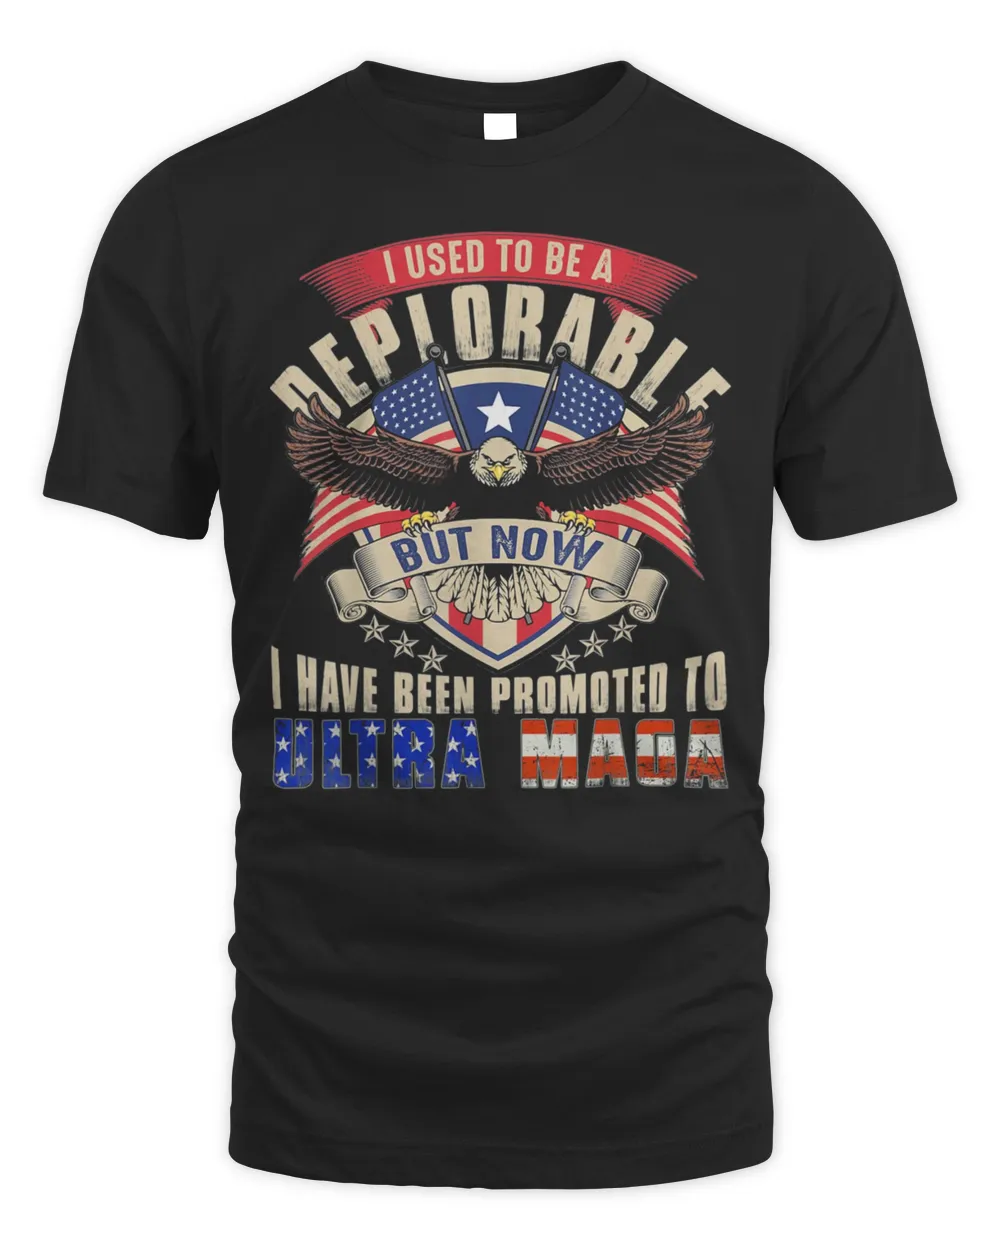 Ultra Maga Now I Have Been Promoted To Ultra Maga Shirt